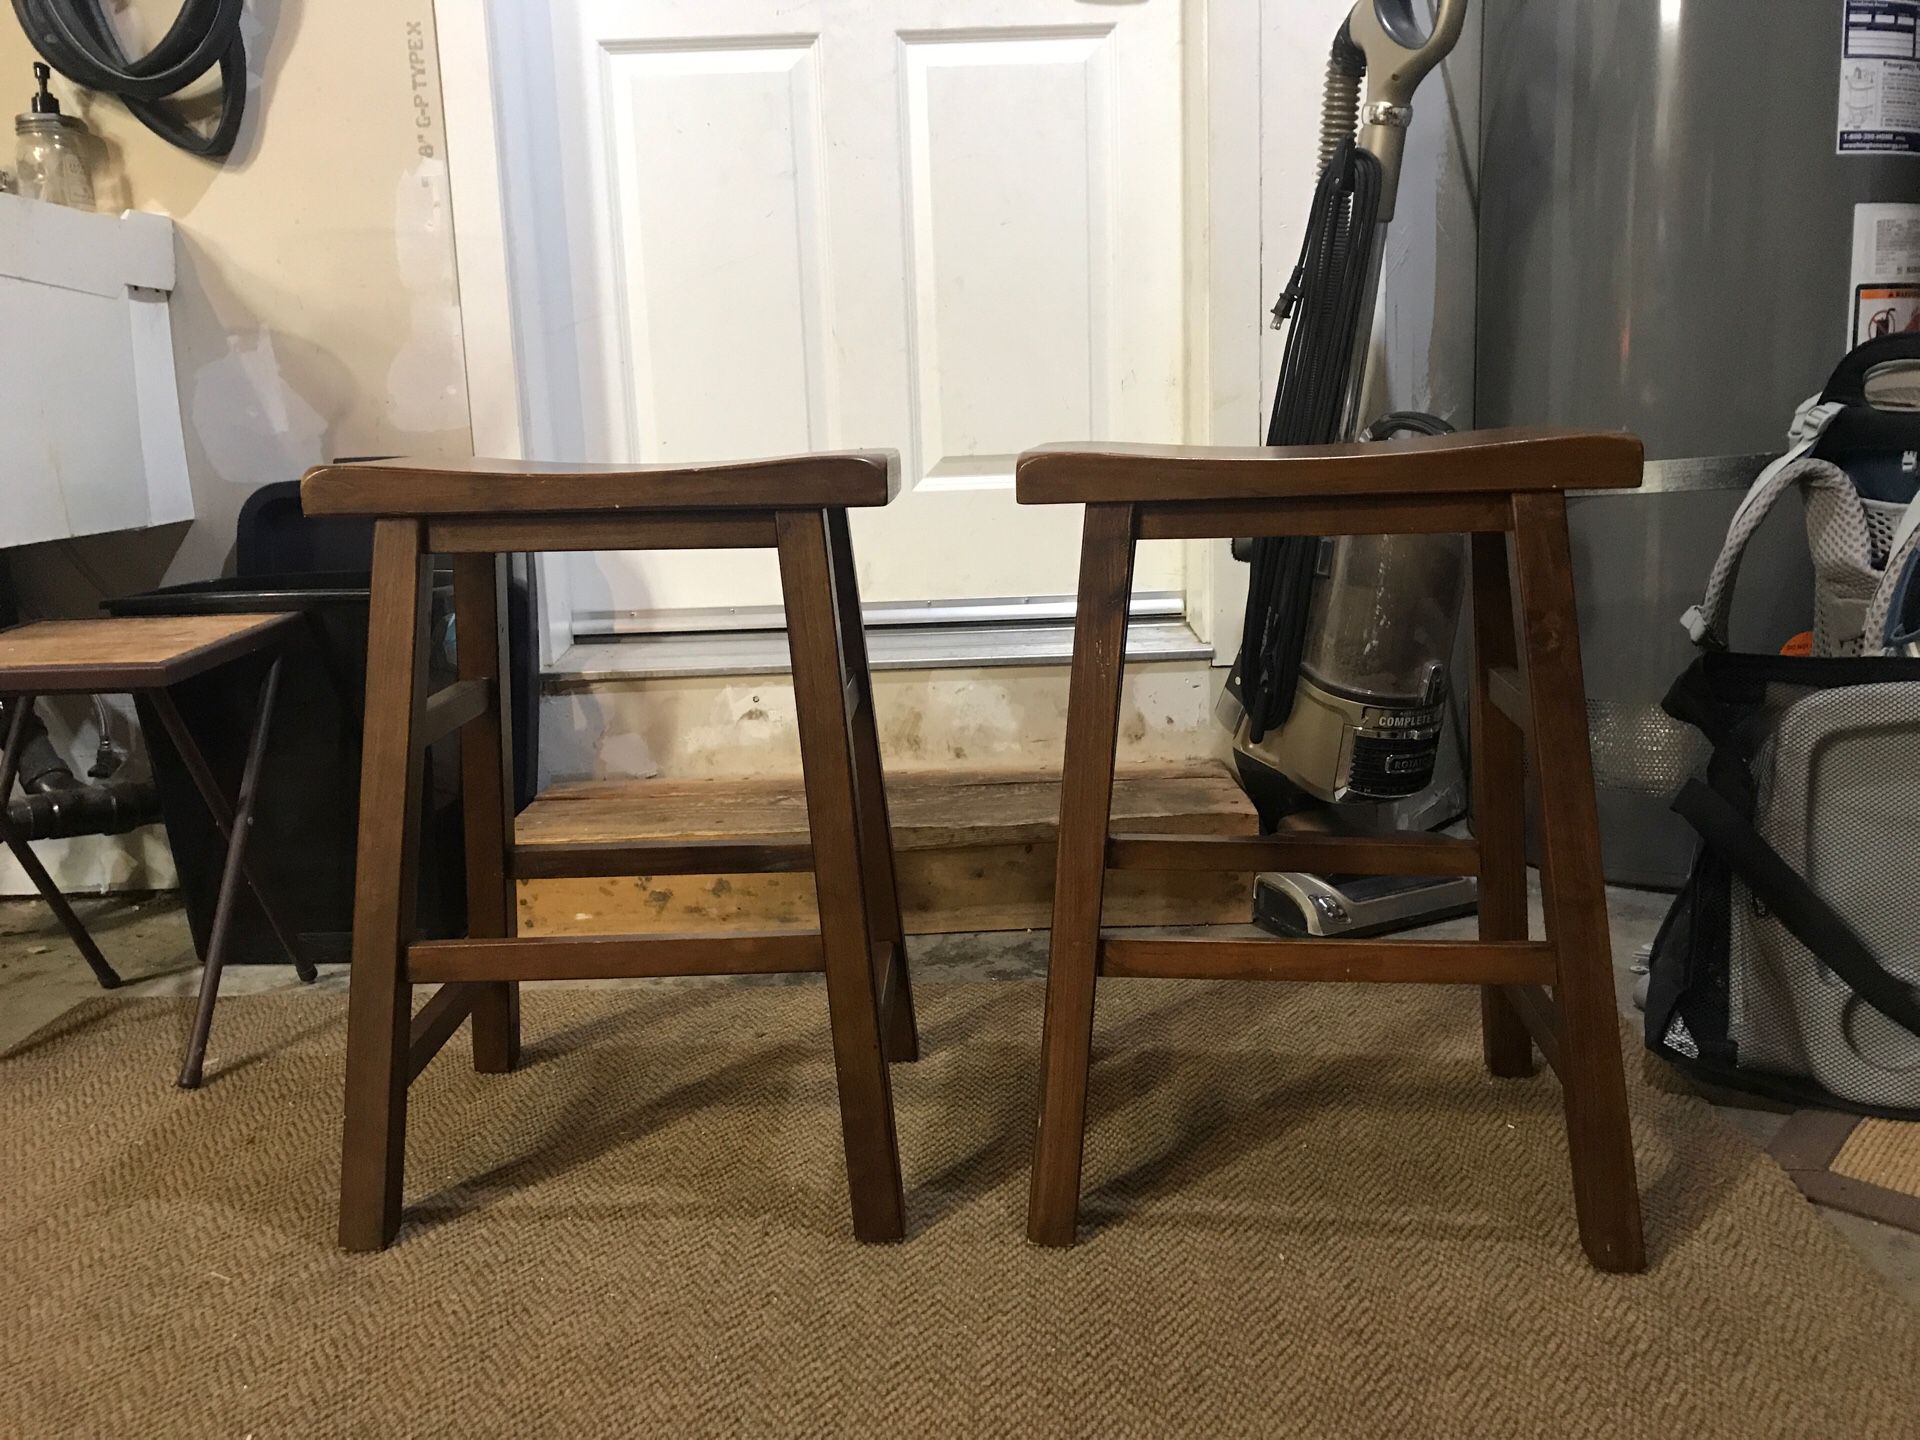 Two wooden bar stools